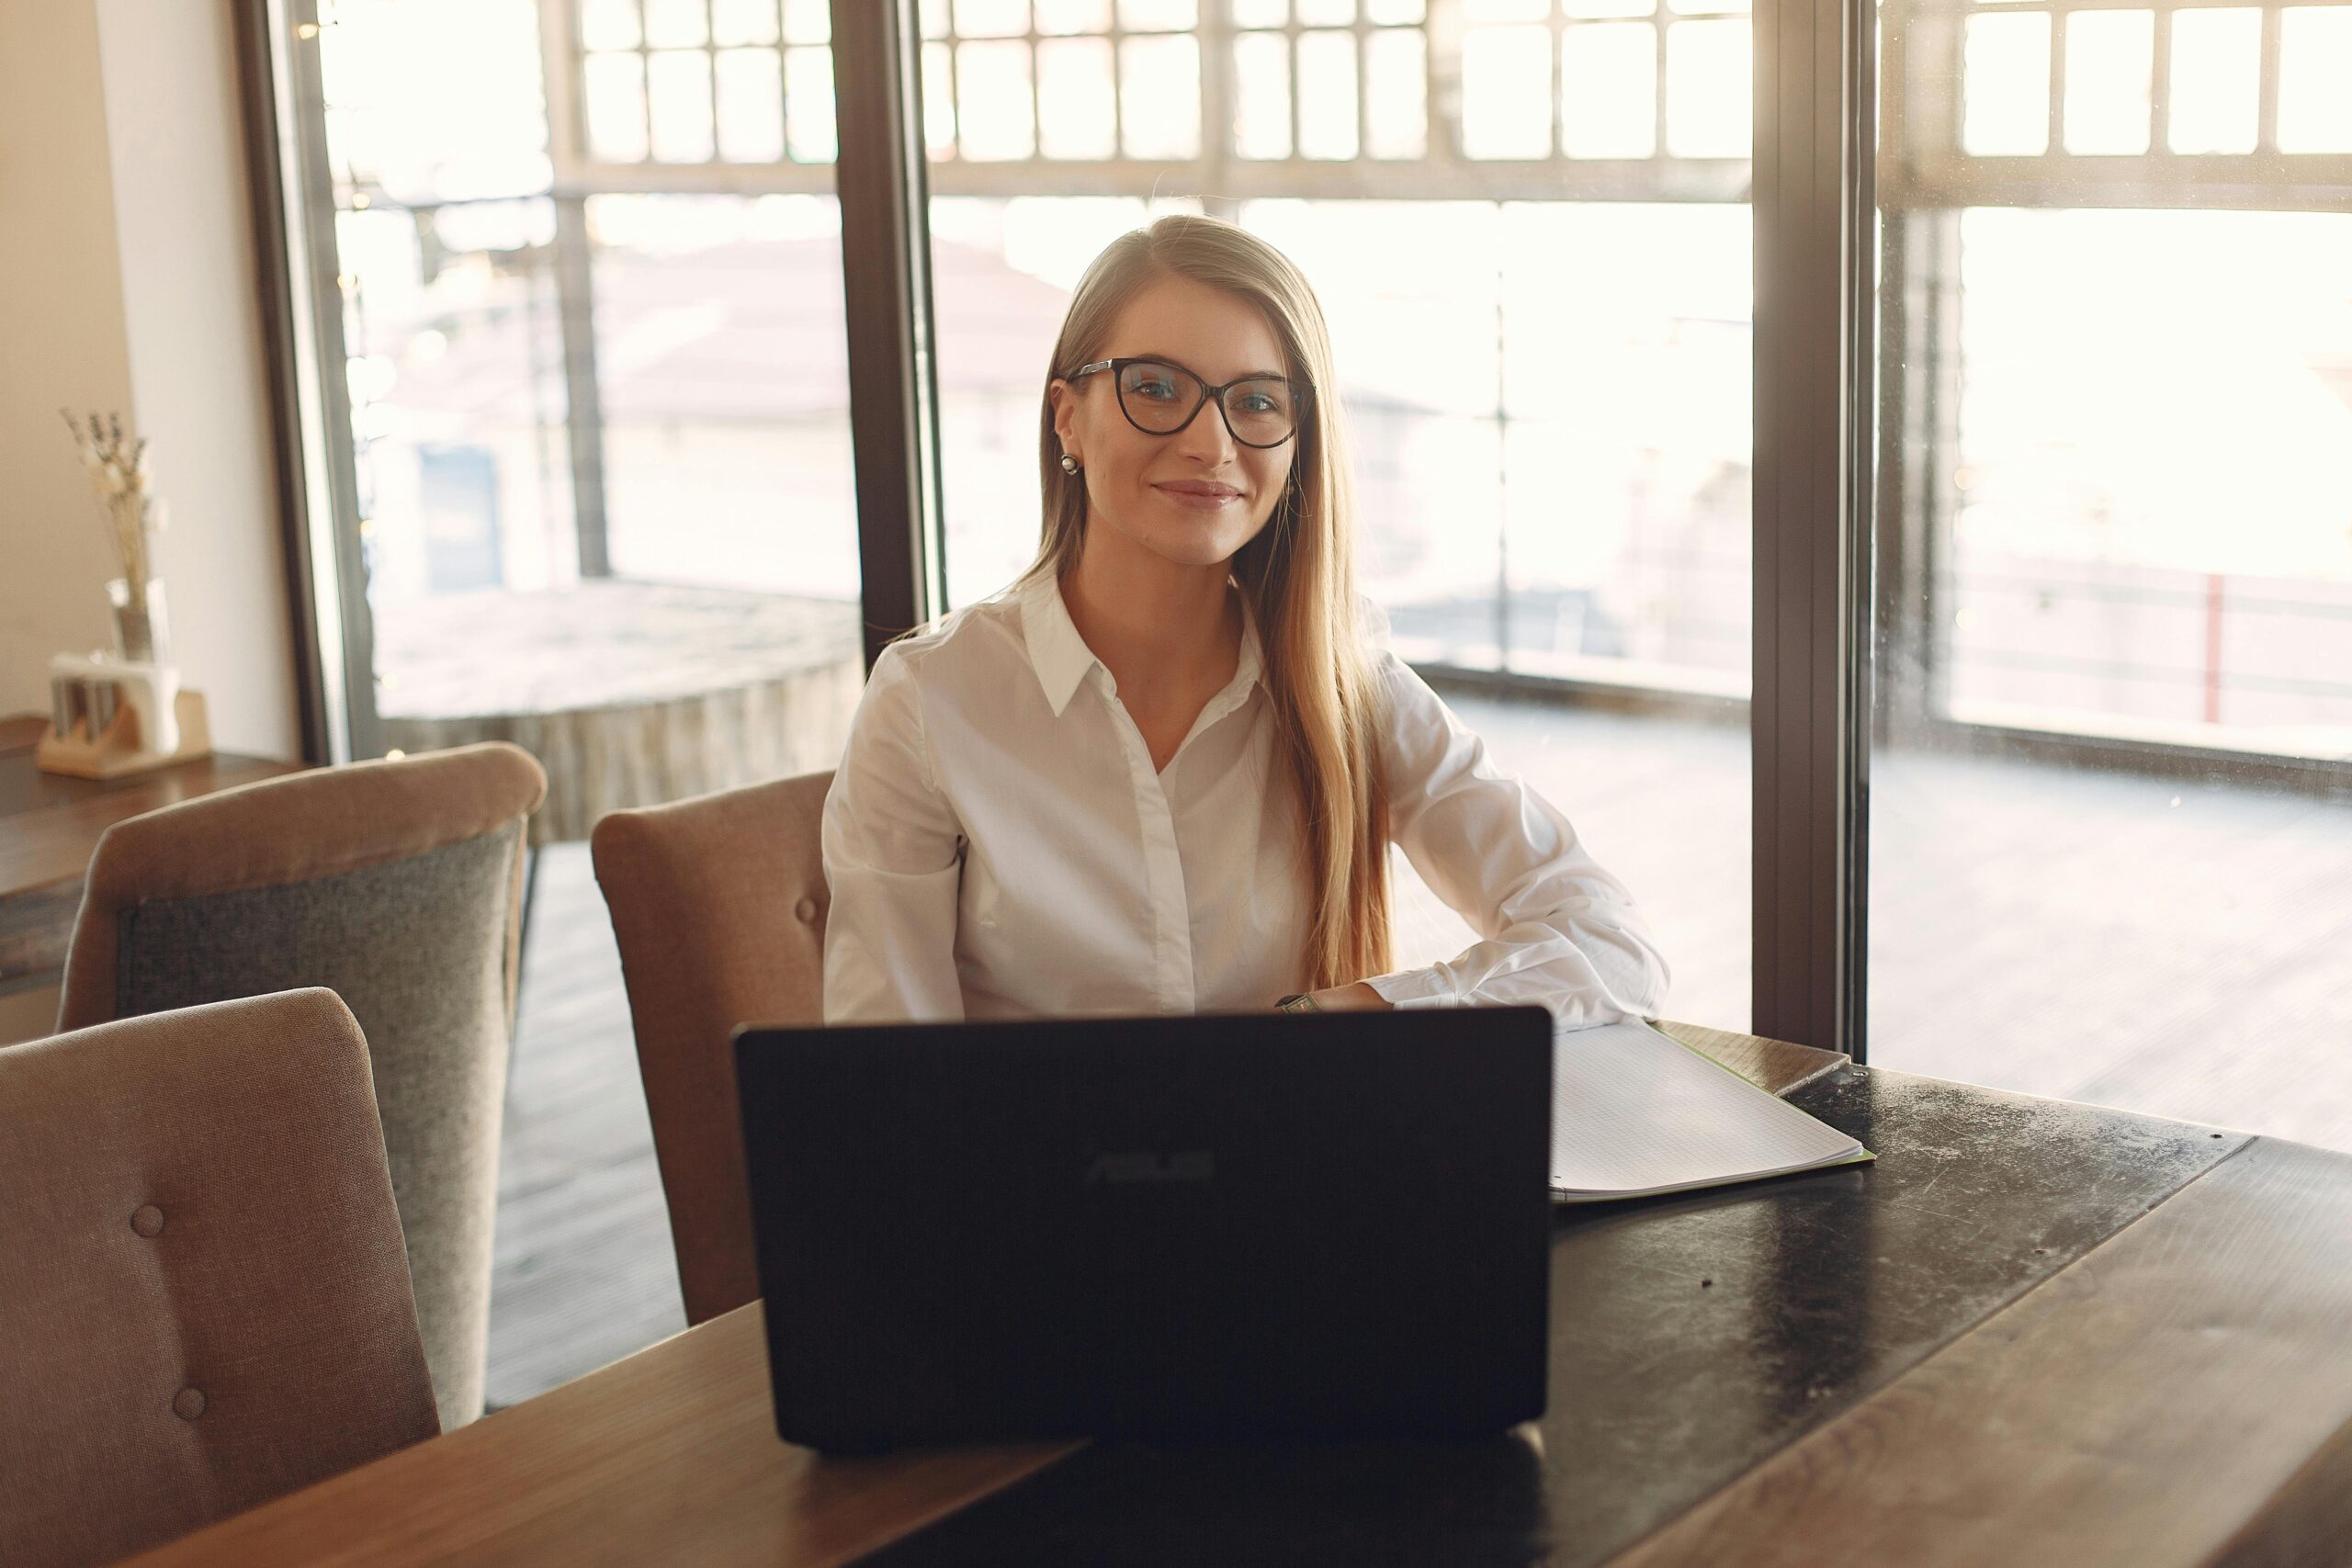 Woman happily smiling in front of her laptop